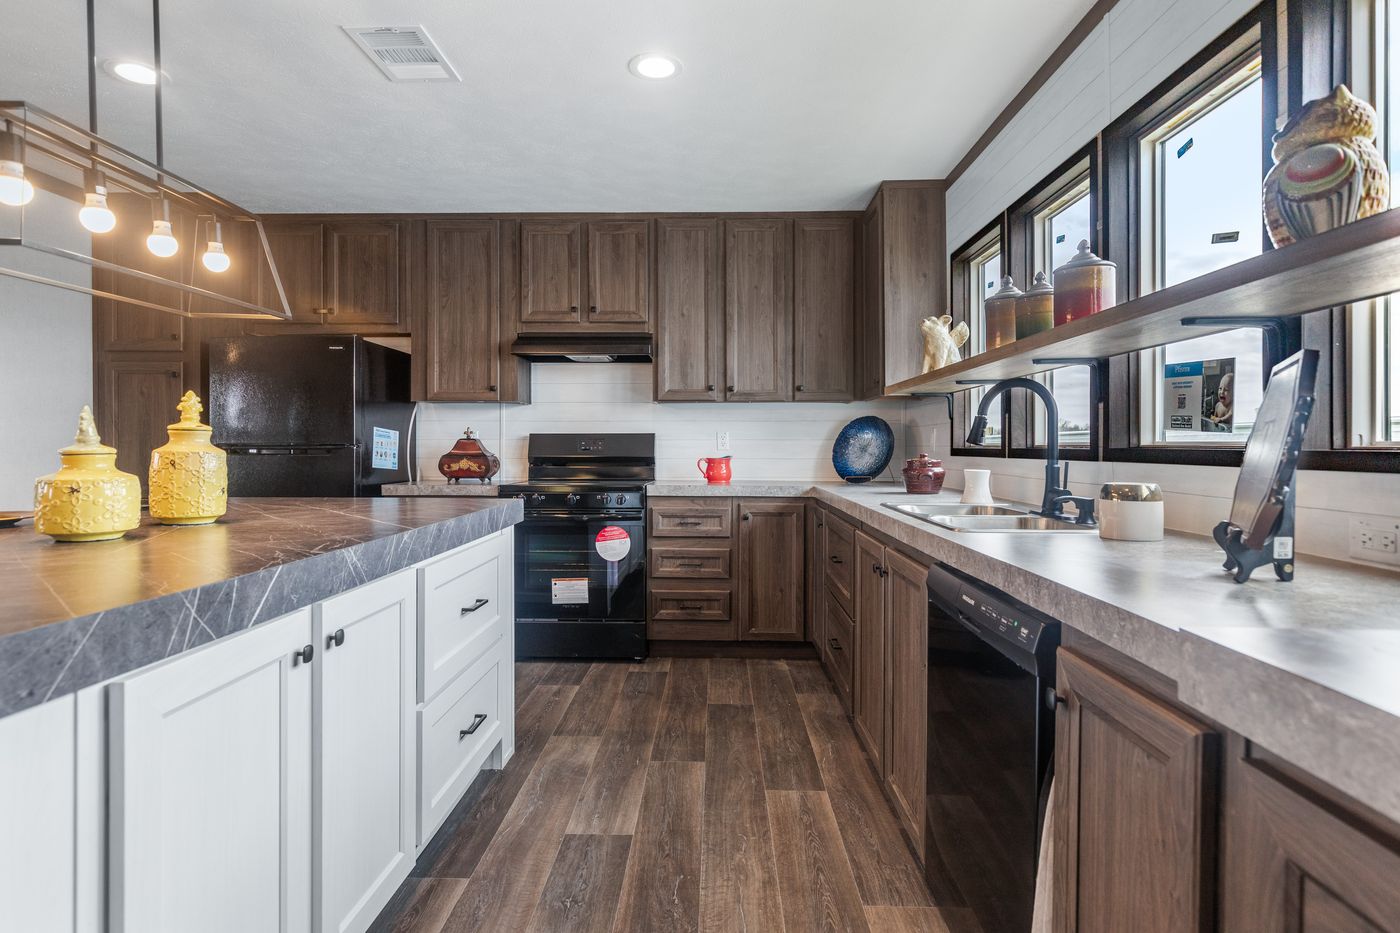 The HERCULES Kitchen. This Manufactured Mobile Home features 4 bedrooms and 2 baths.